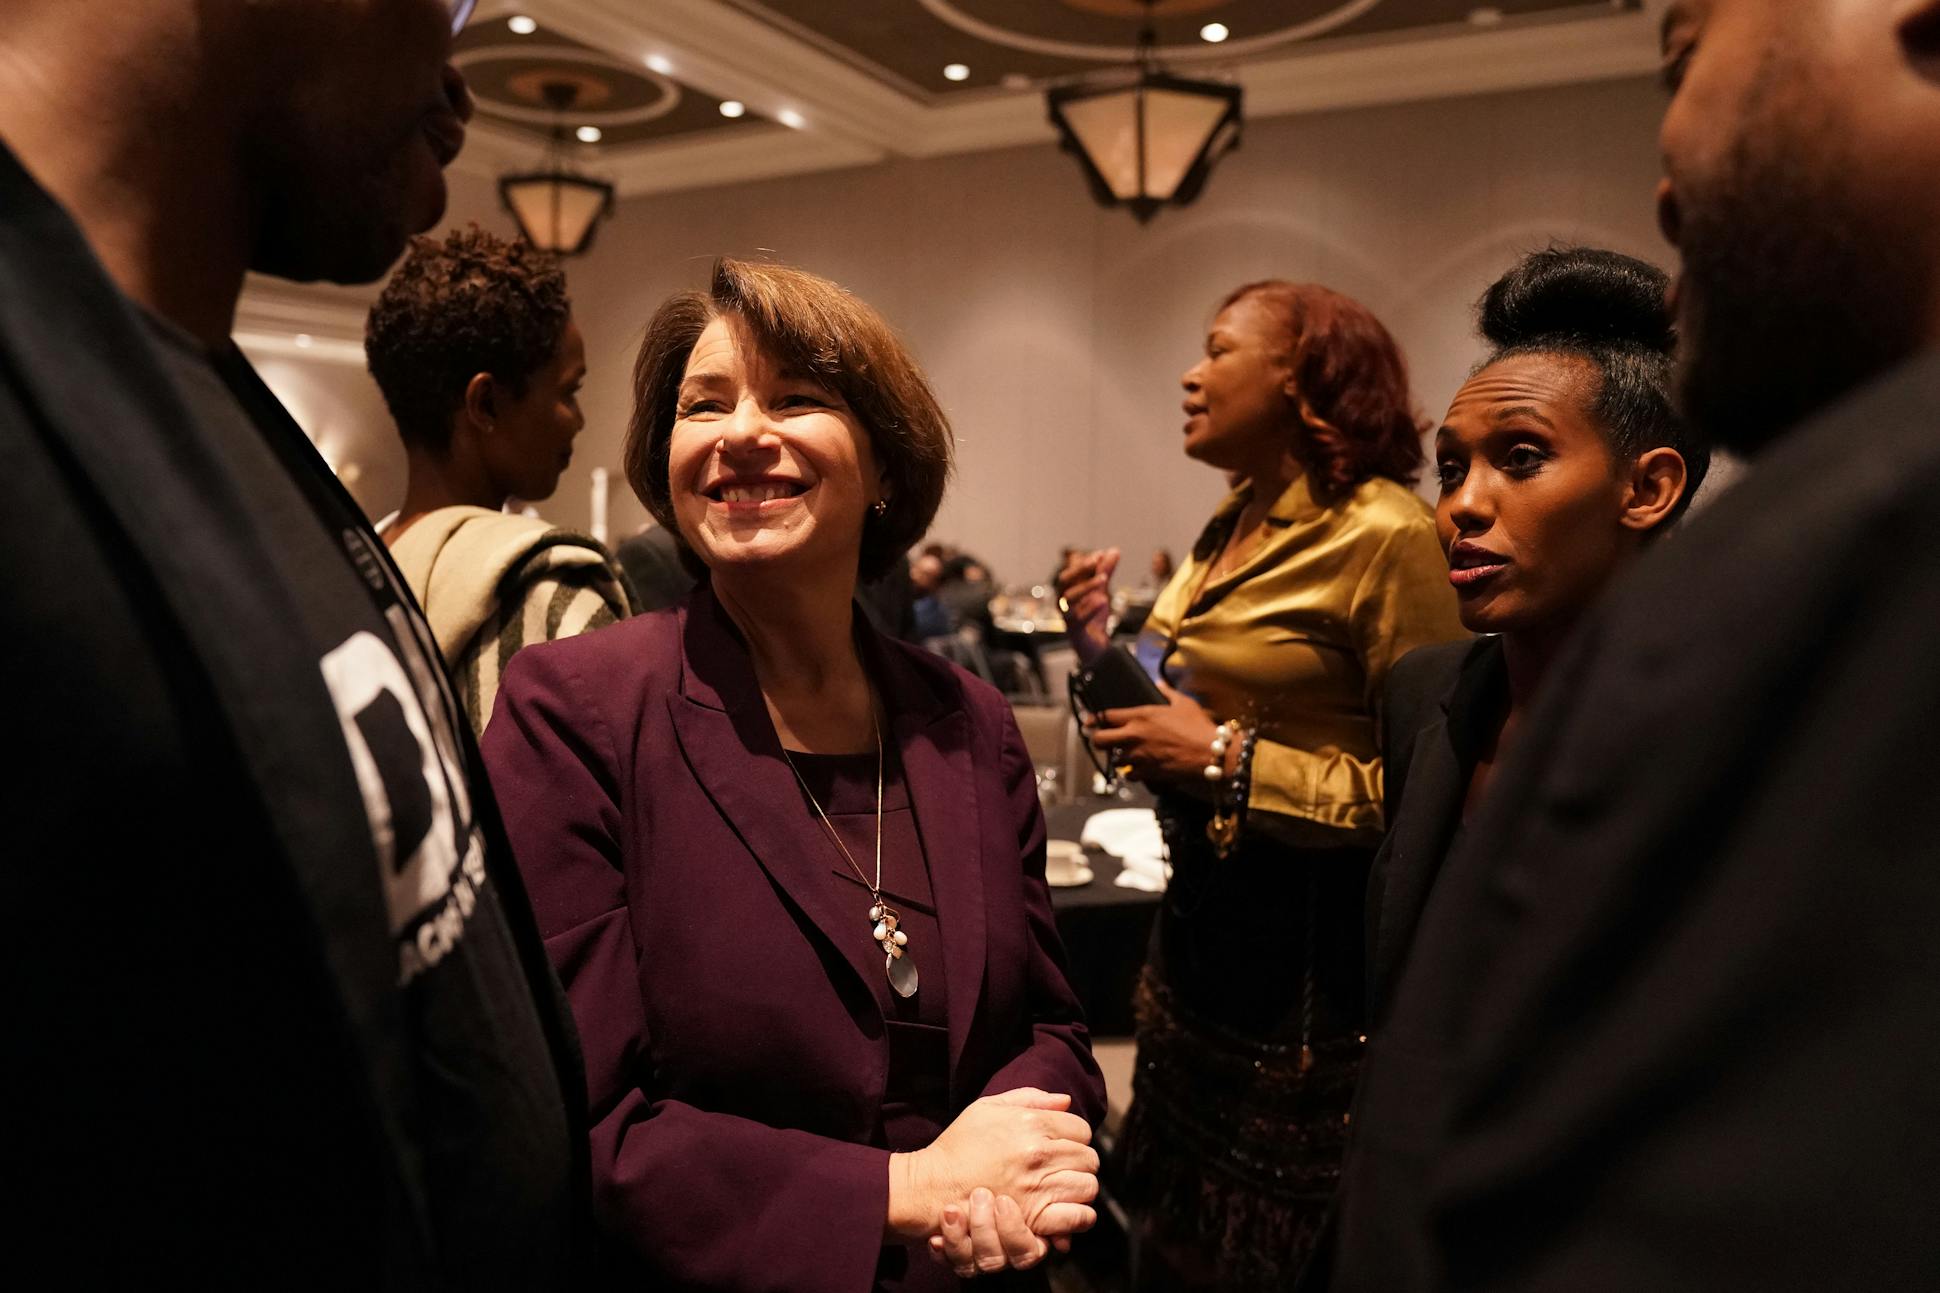 Amy Klobuchar spoke with attendees of the Blacks in Tech Conference breakfast before speaking during the program in St. Paul, Minn.